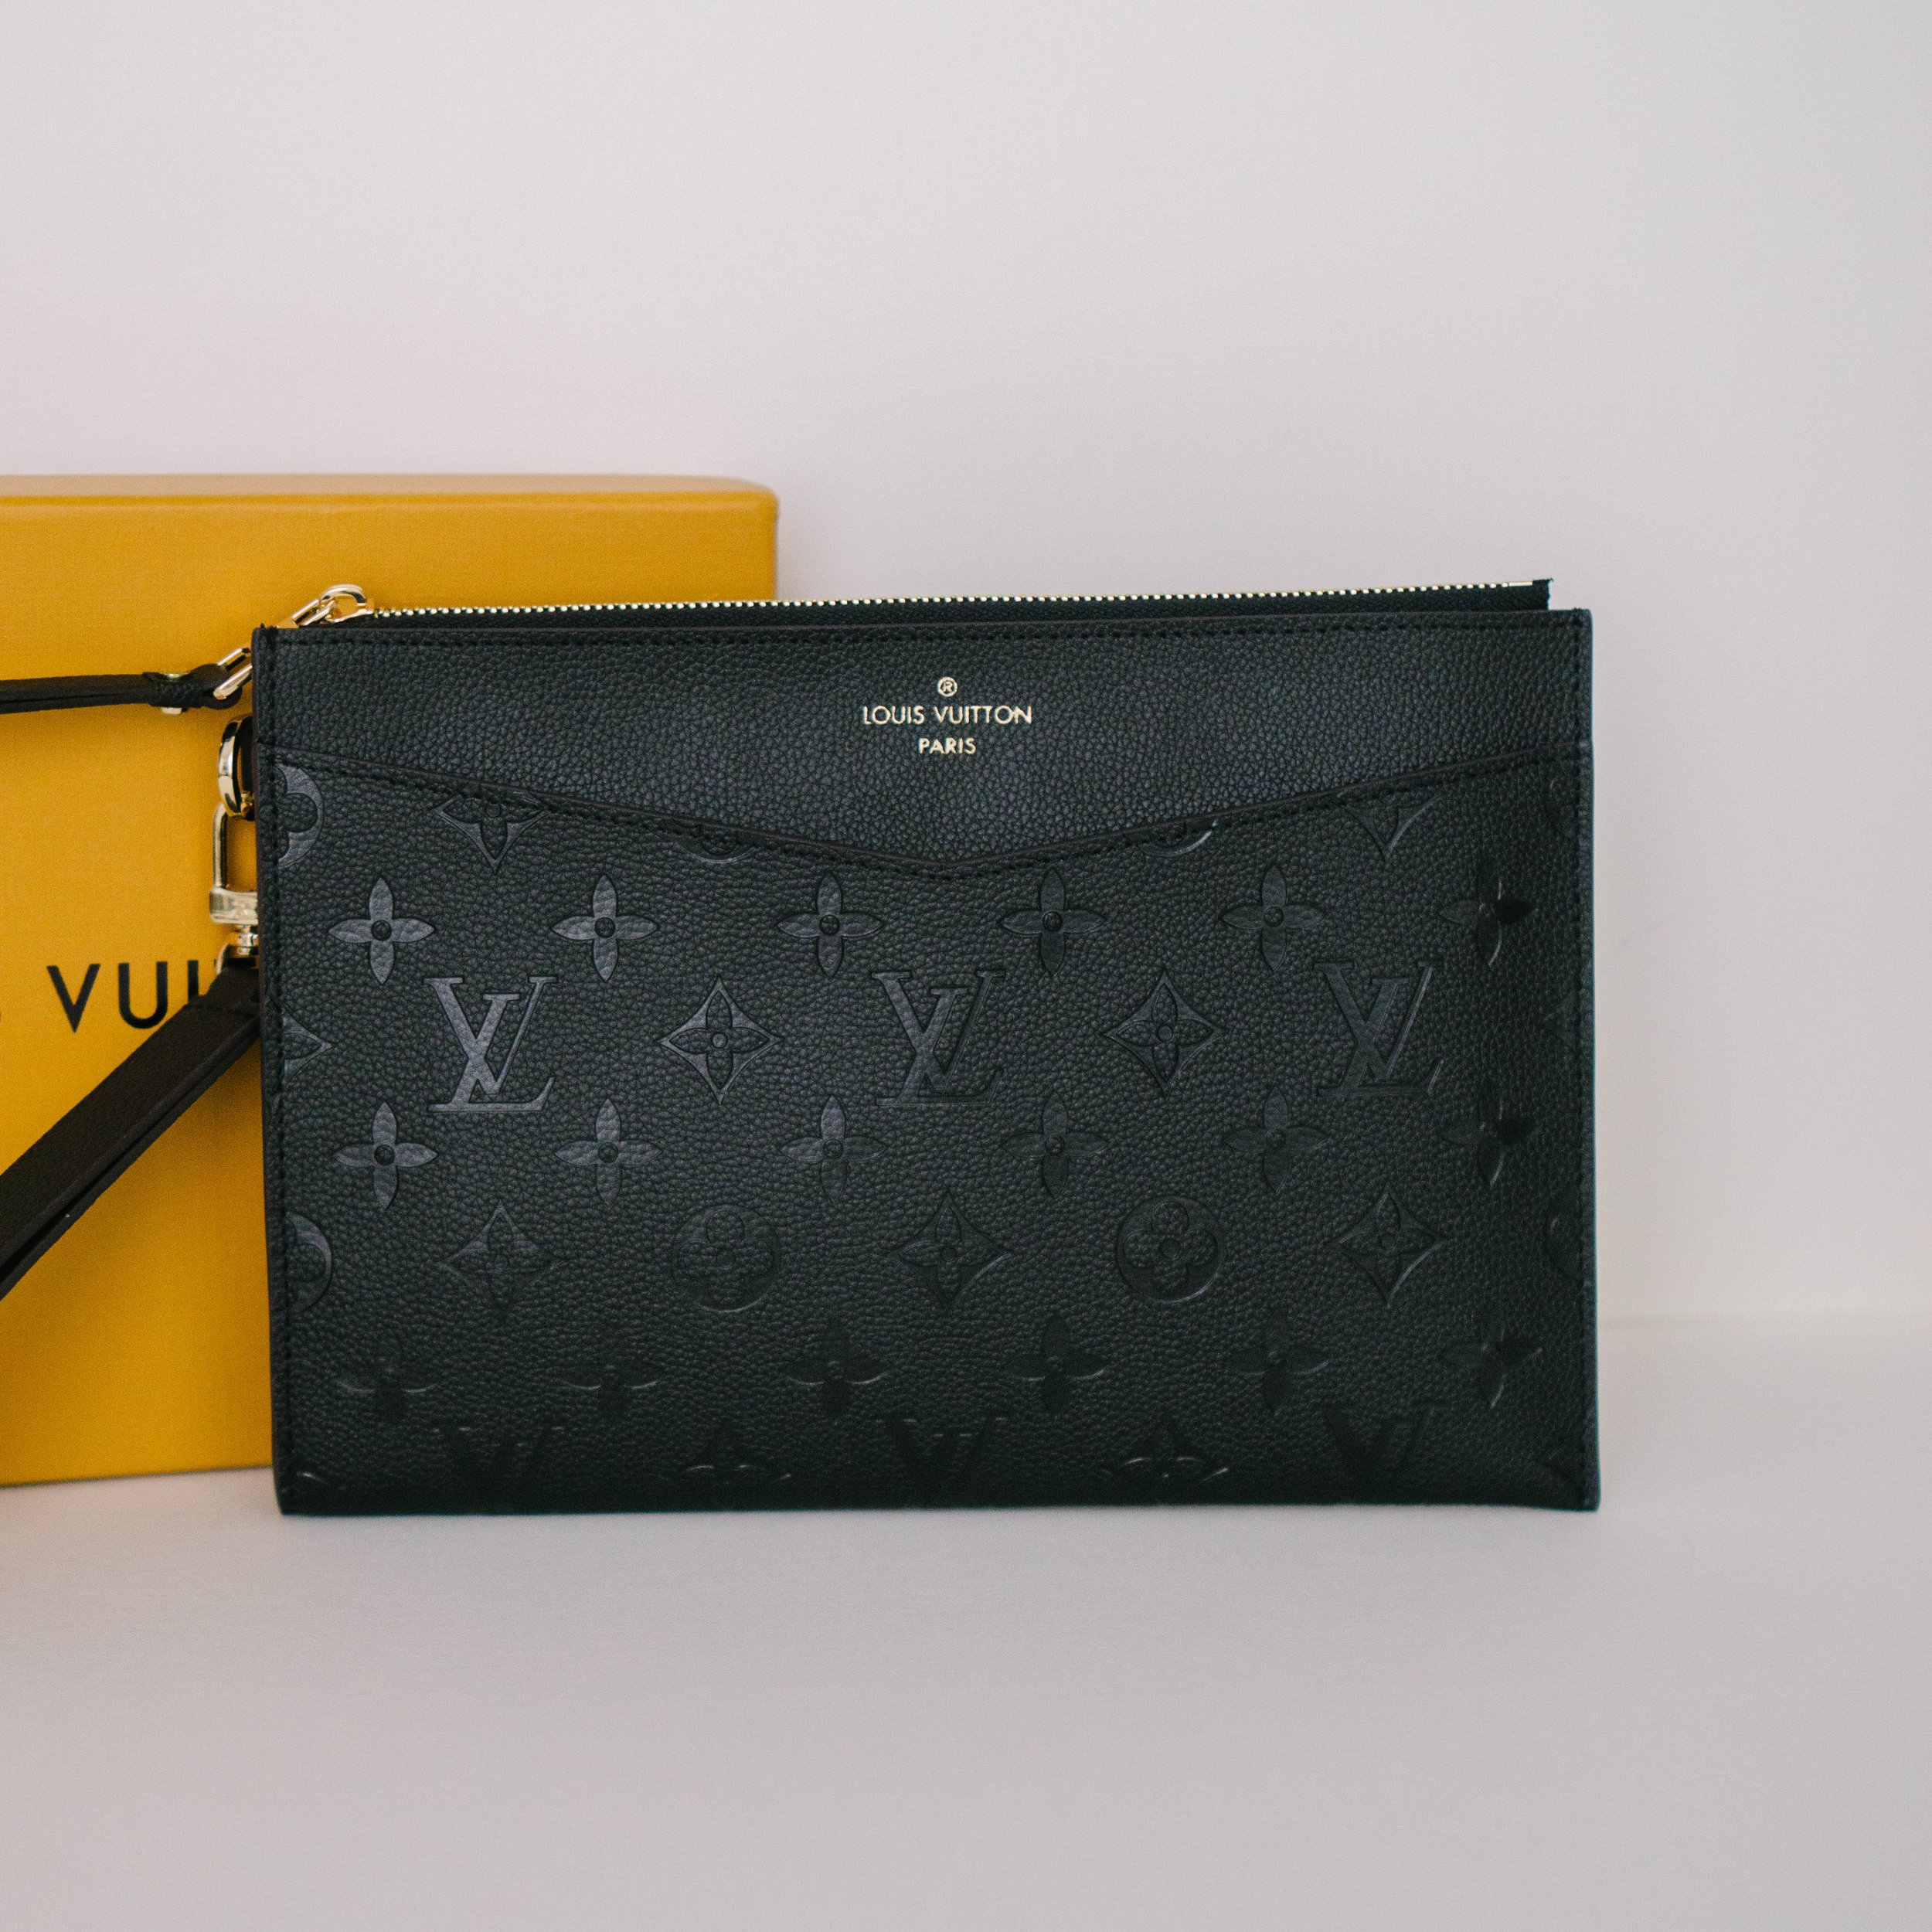 LOUIS VUITTON Daily Pouch Monogram Embossed Leather Clutch Bag Black